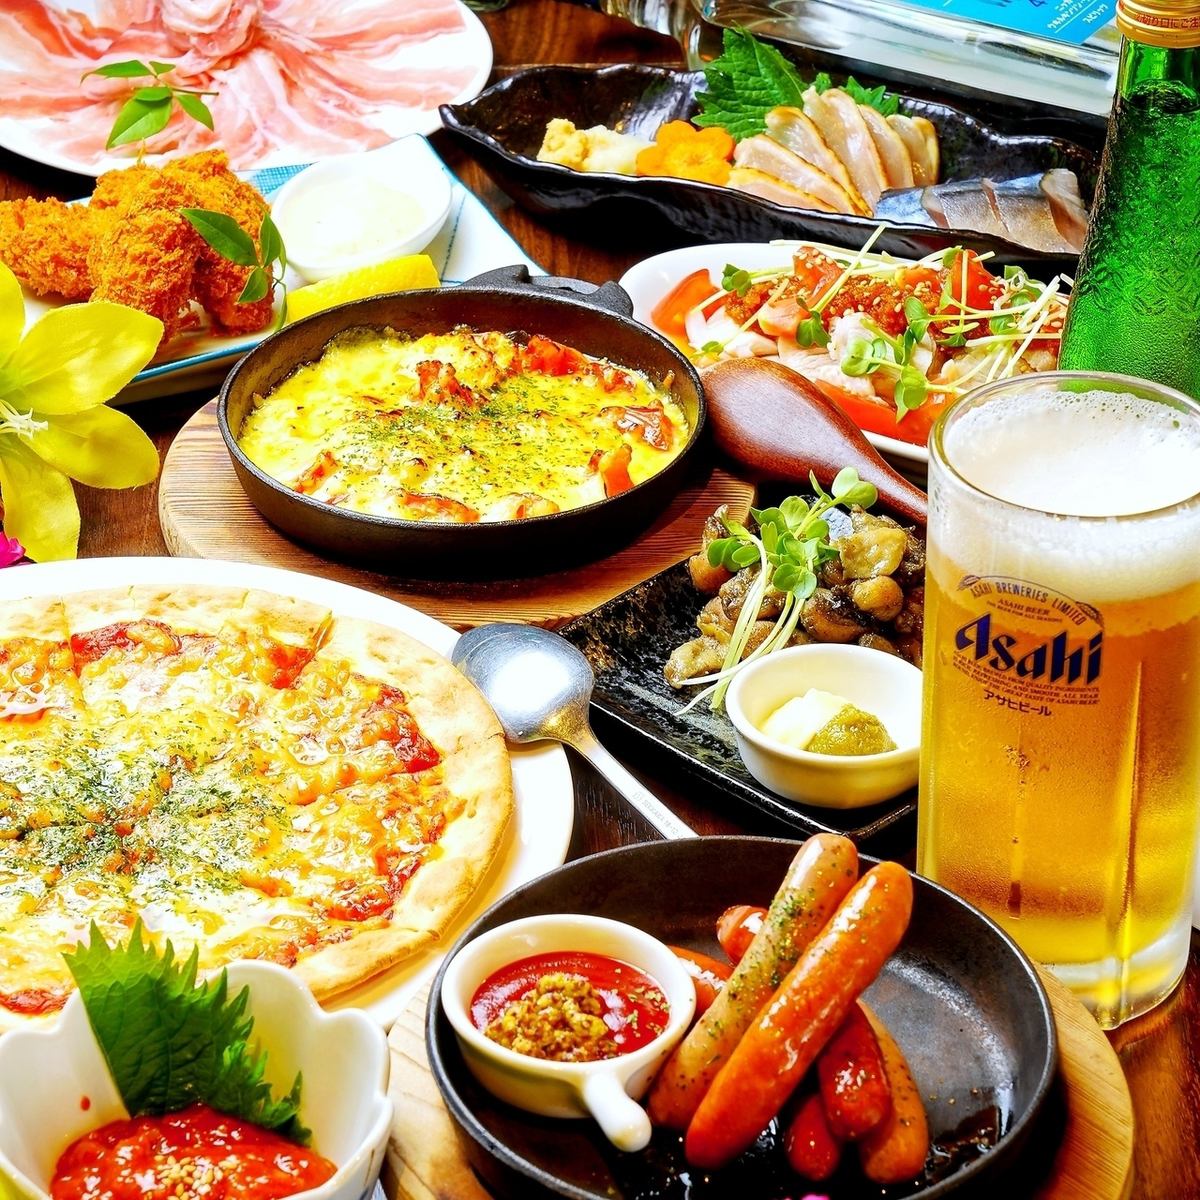 All-you-can-eat with a wide variety of dishes! Popular all-you-can-eat and drink options start from 3,500 yen